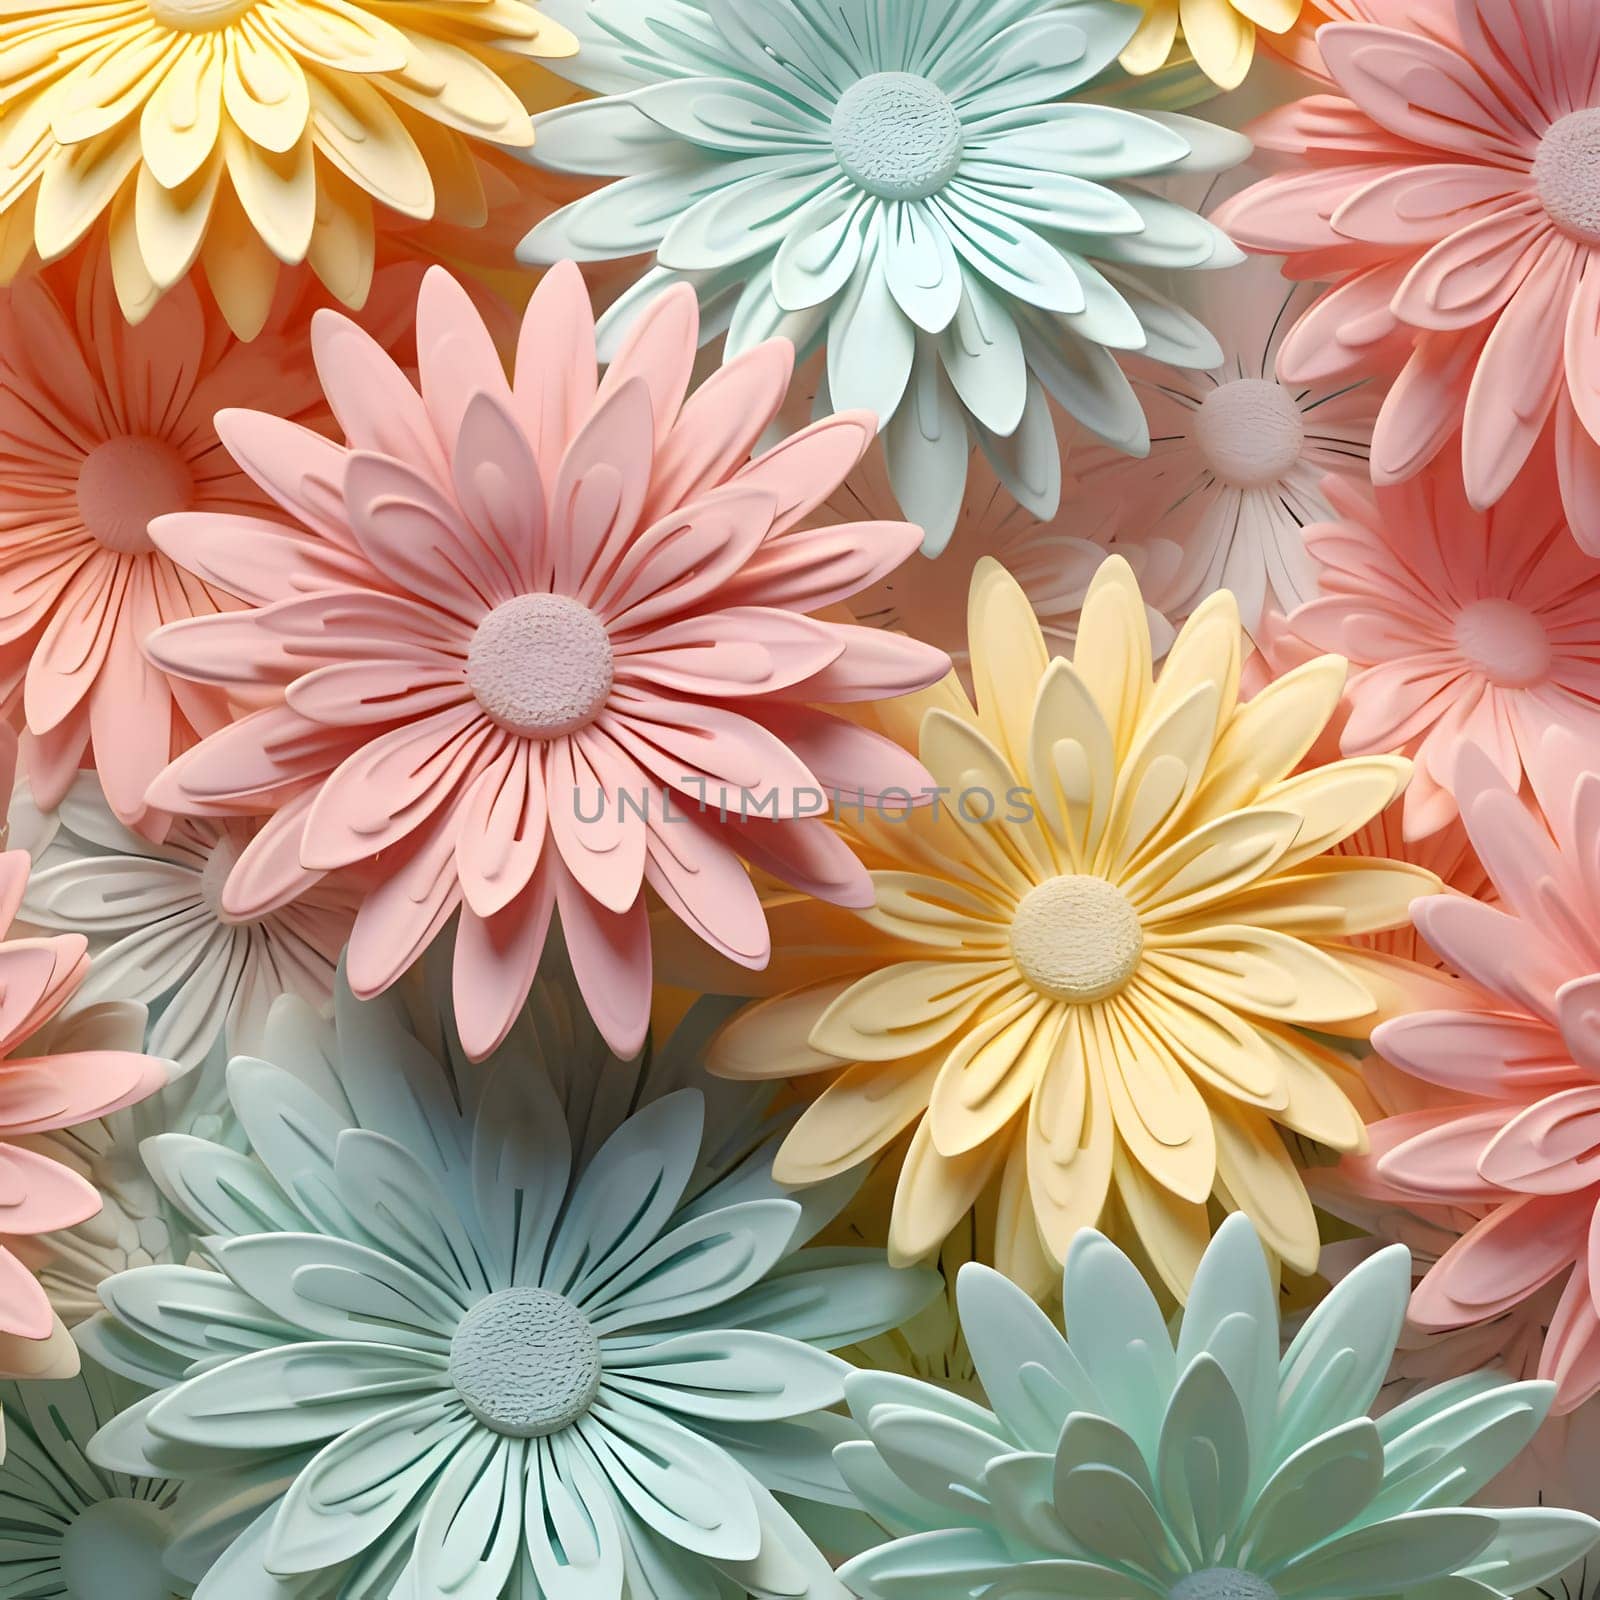 Patterns and banners backgrounds: Seamless floral pattern with gerbera flowers in pastel colors